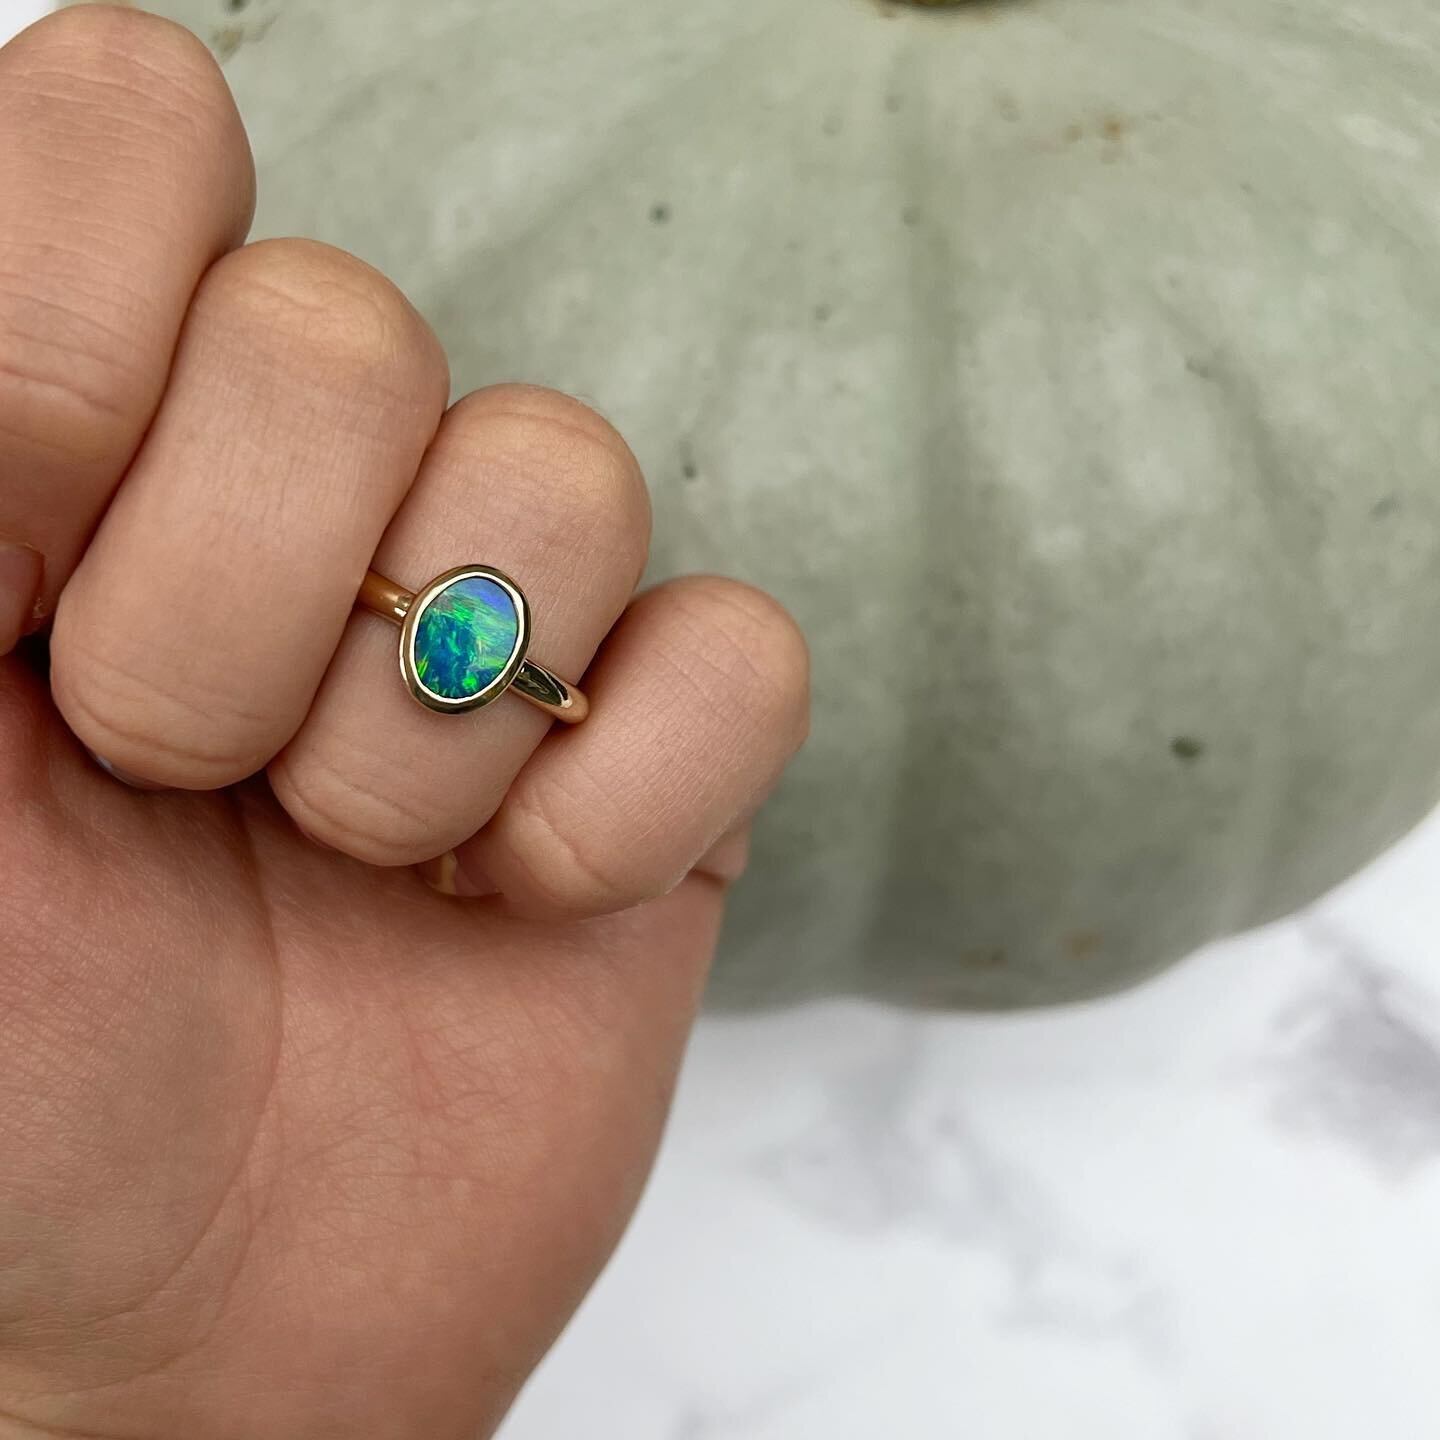 ✨Opal✨

This beautiful Opal was bought back from Australia many, many years ago by my customers grandmother. Now the Opal is set in a handmade gold ring, to celebrate F&rsquo;s 18th birthday 🤍